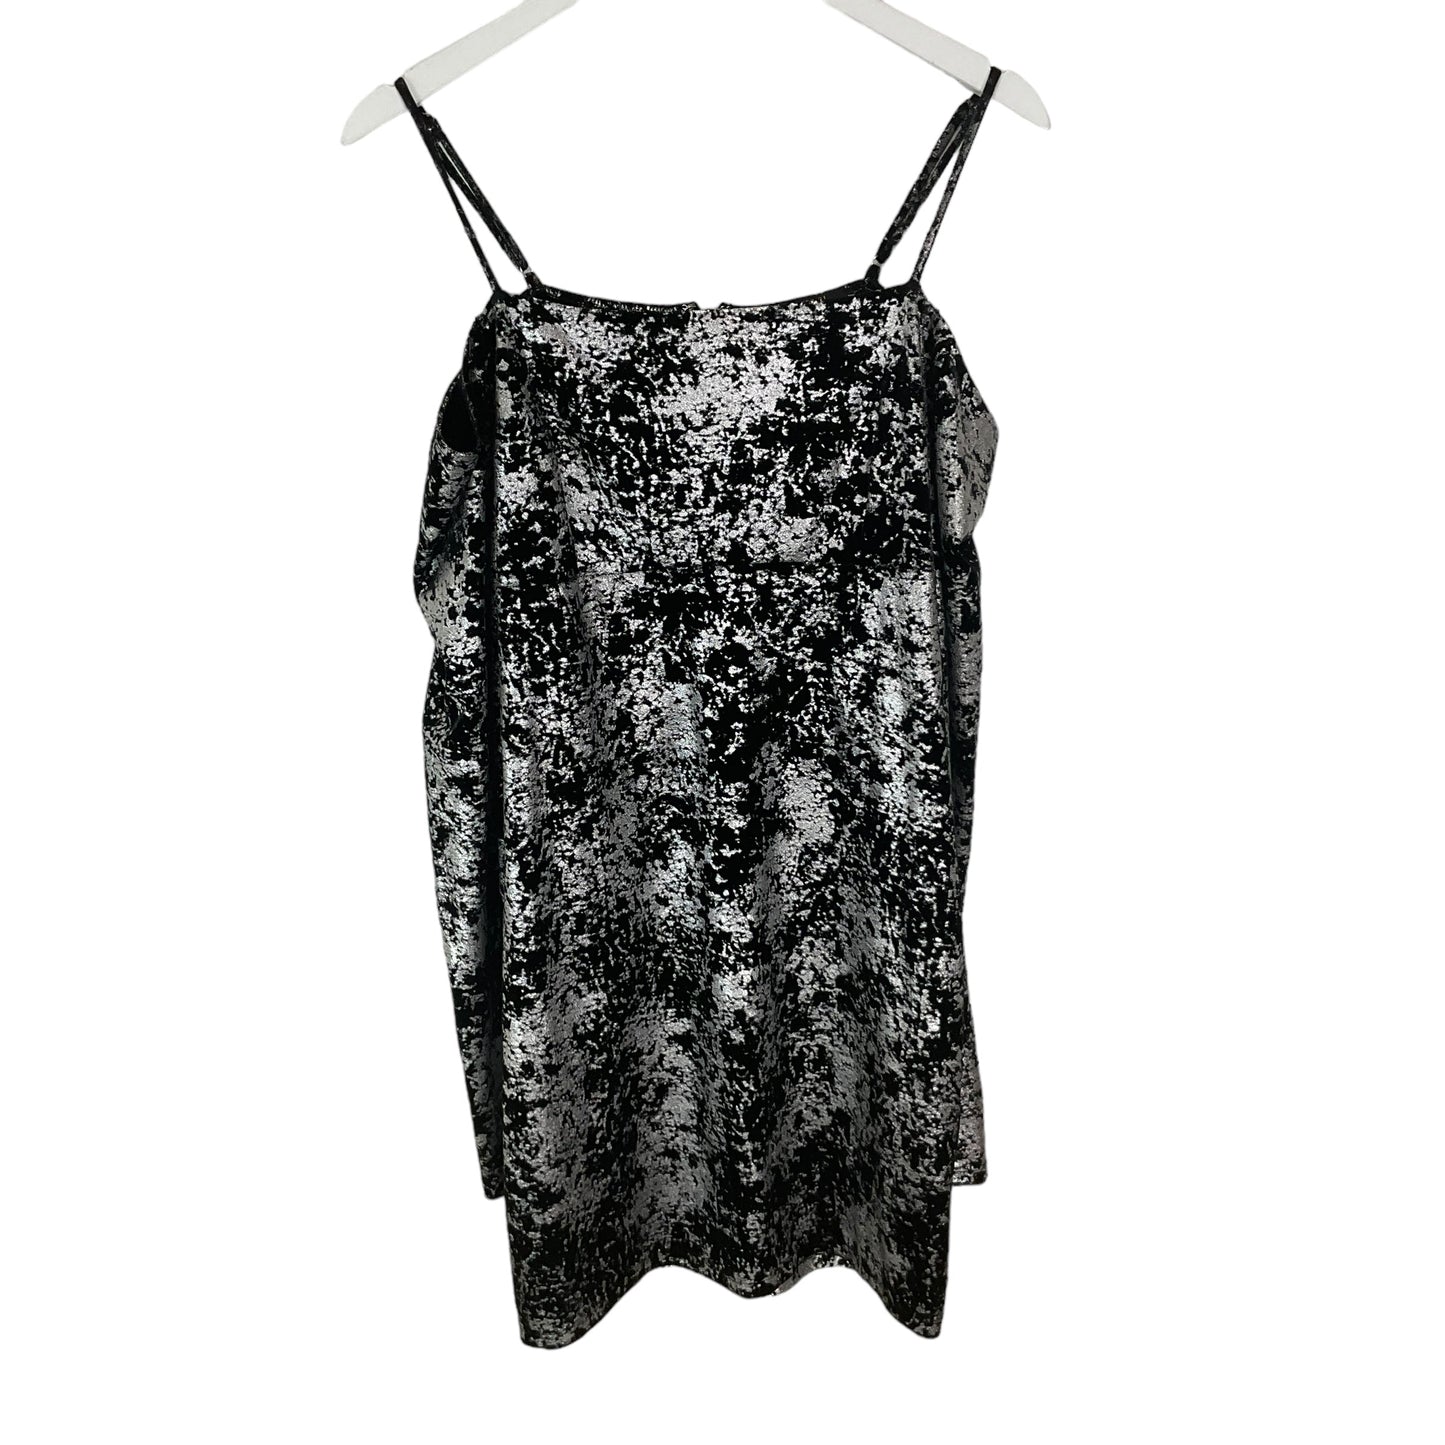 Black & Grey Dress Party Short Forever 21, Size S